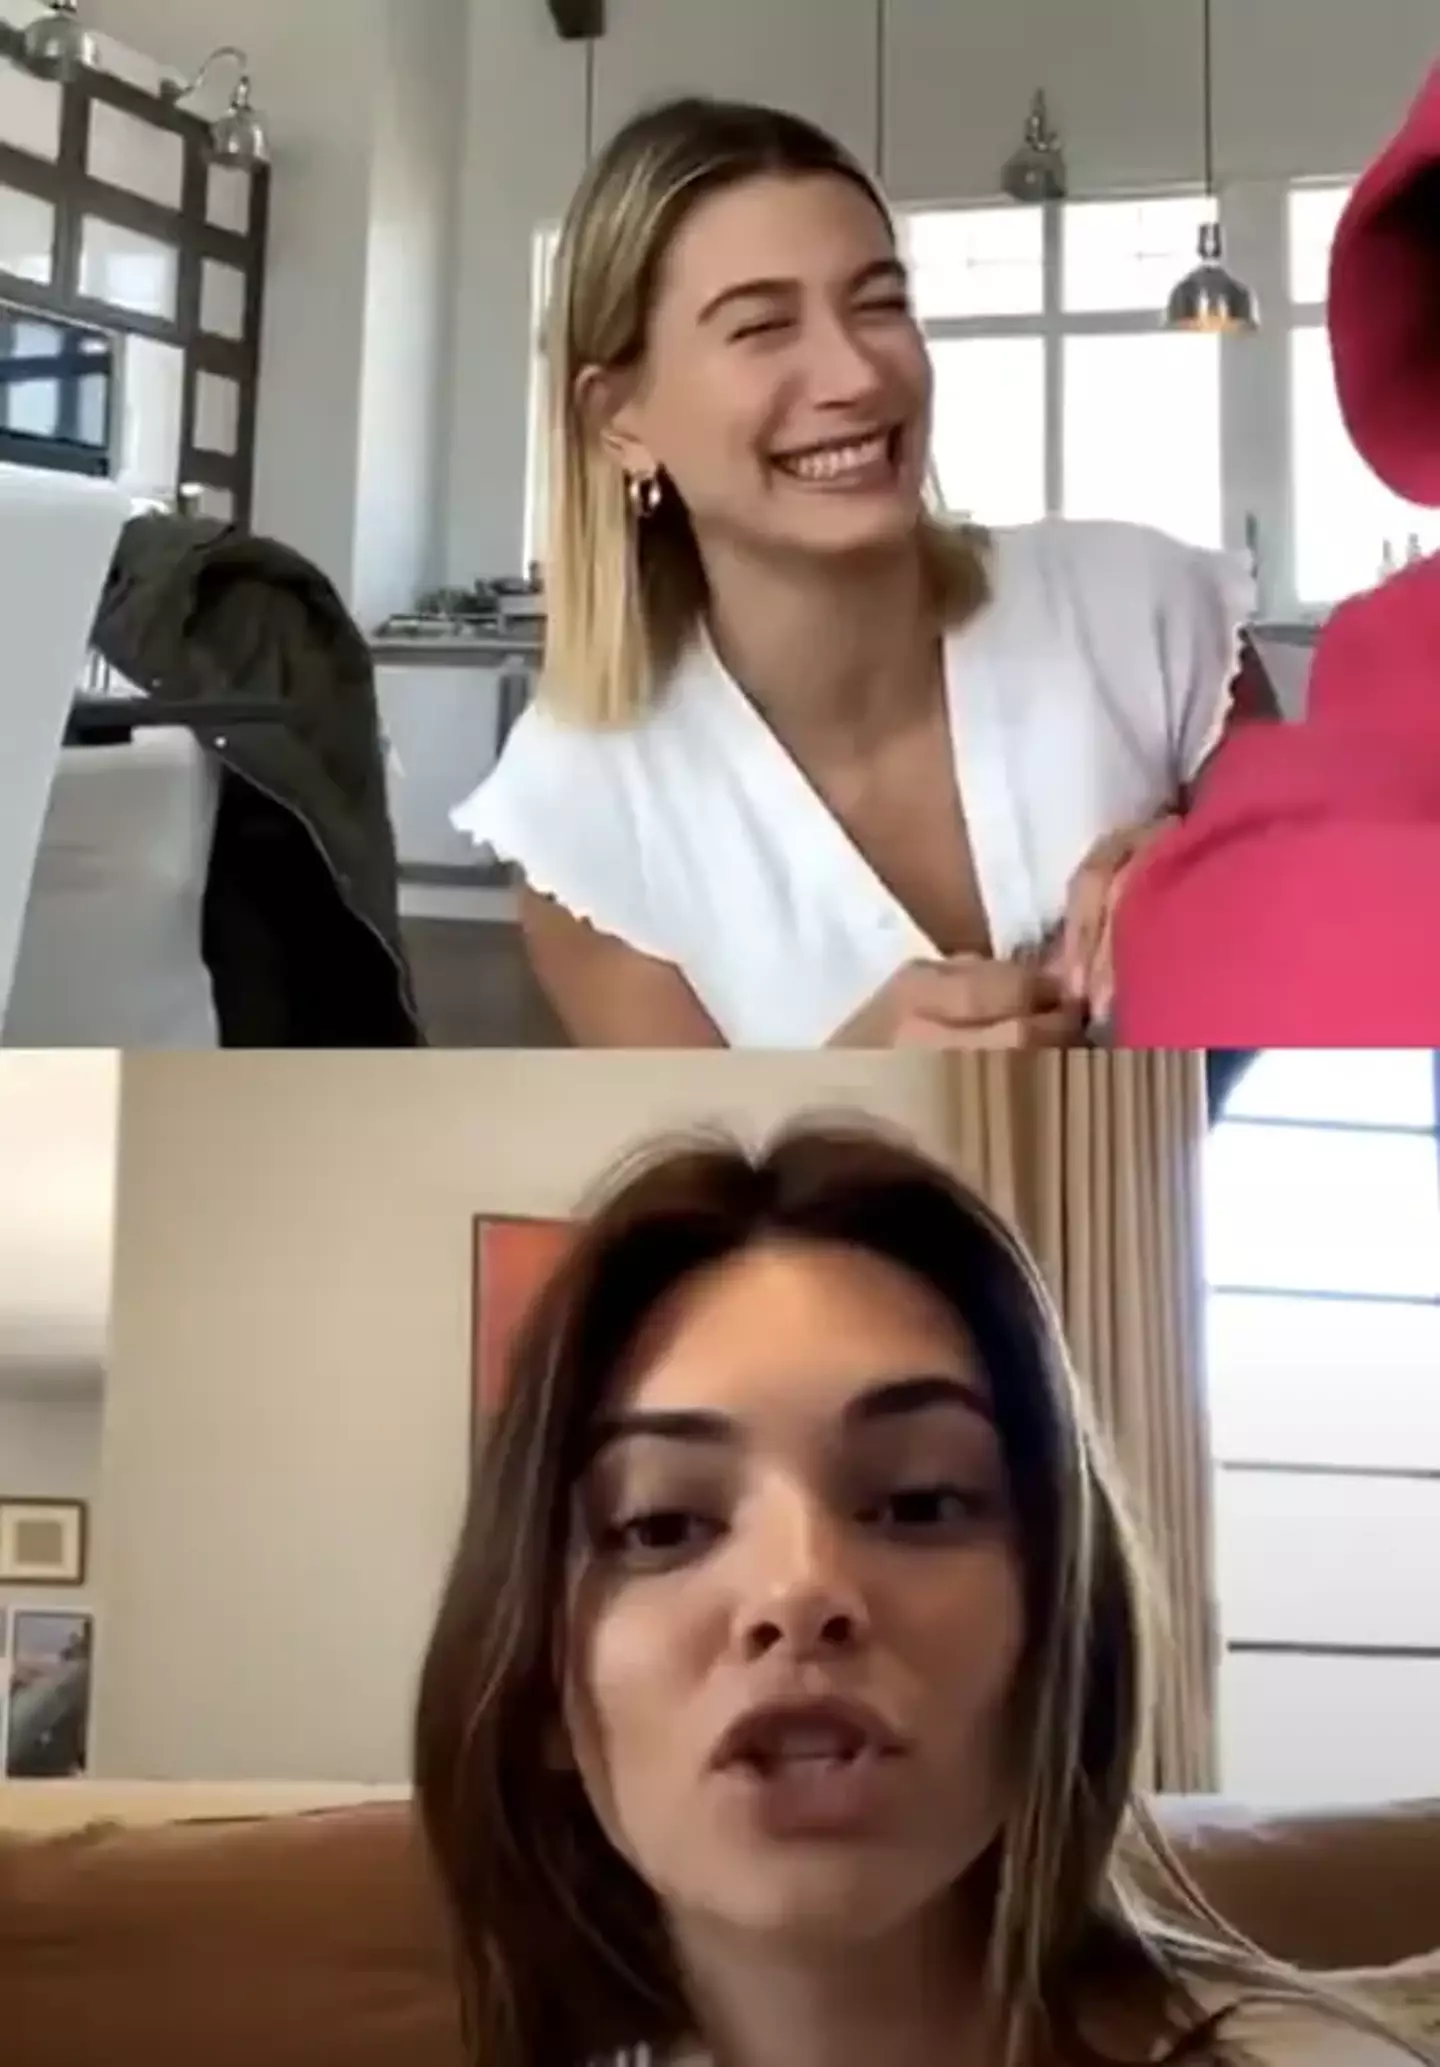 Hailey's smile quickly faded after Kendall's comment.